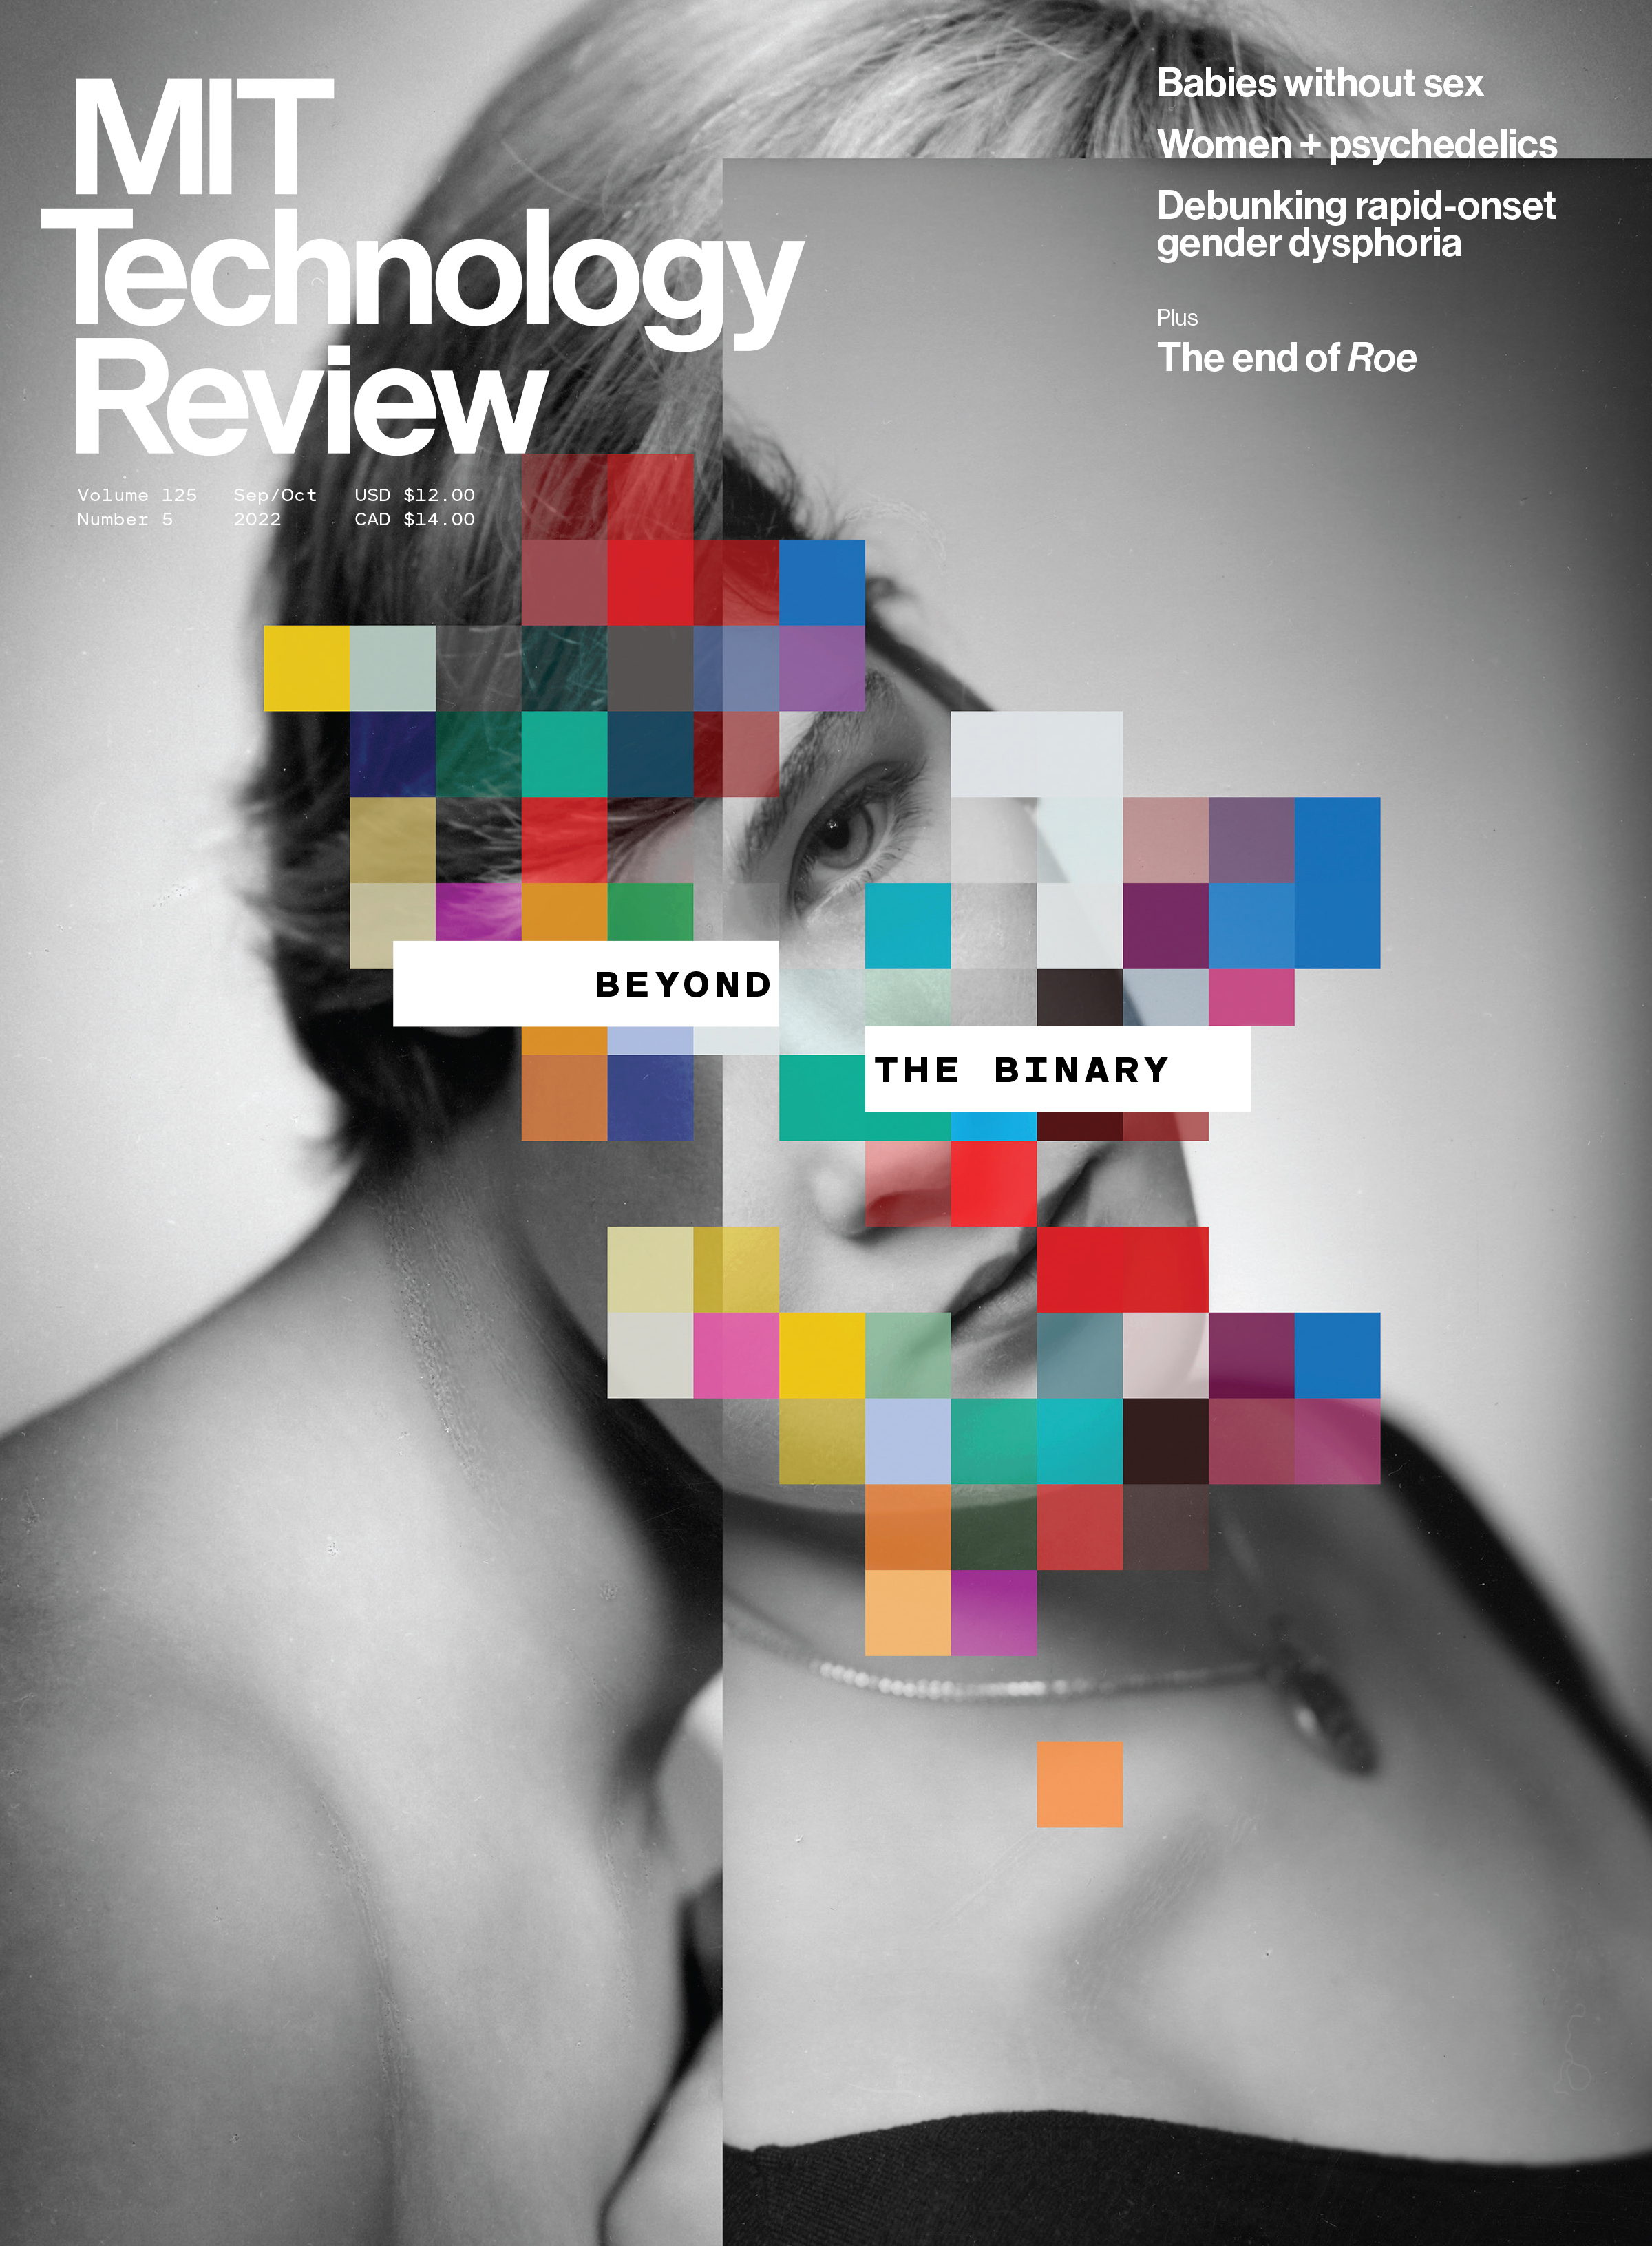 MIT Technology Review “Beyond the Binary” September/October 2022